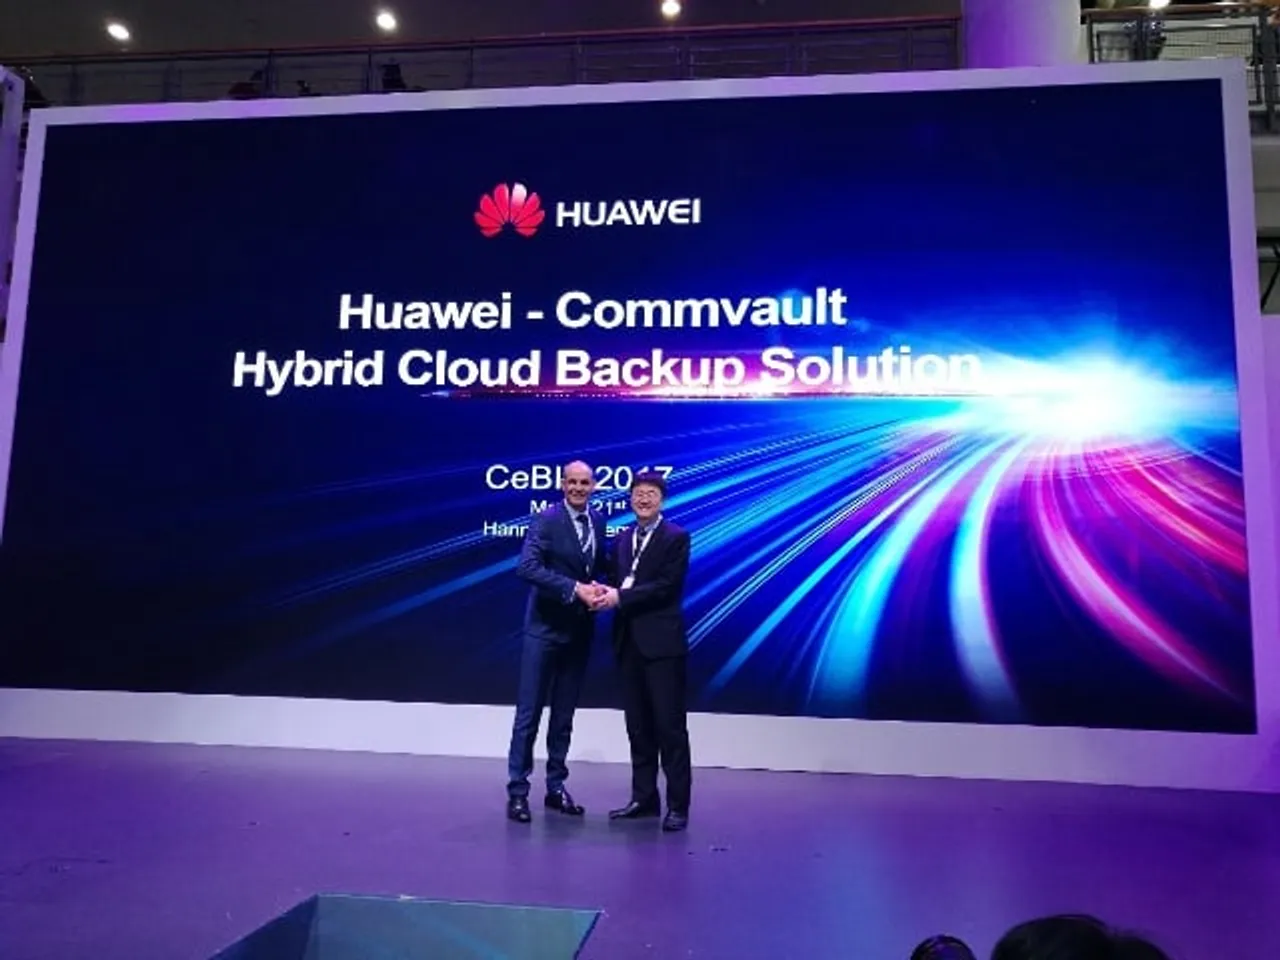 Huawei and Commvault have released their Hybrid Cloud Backup Solution at CeBIT .